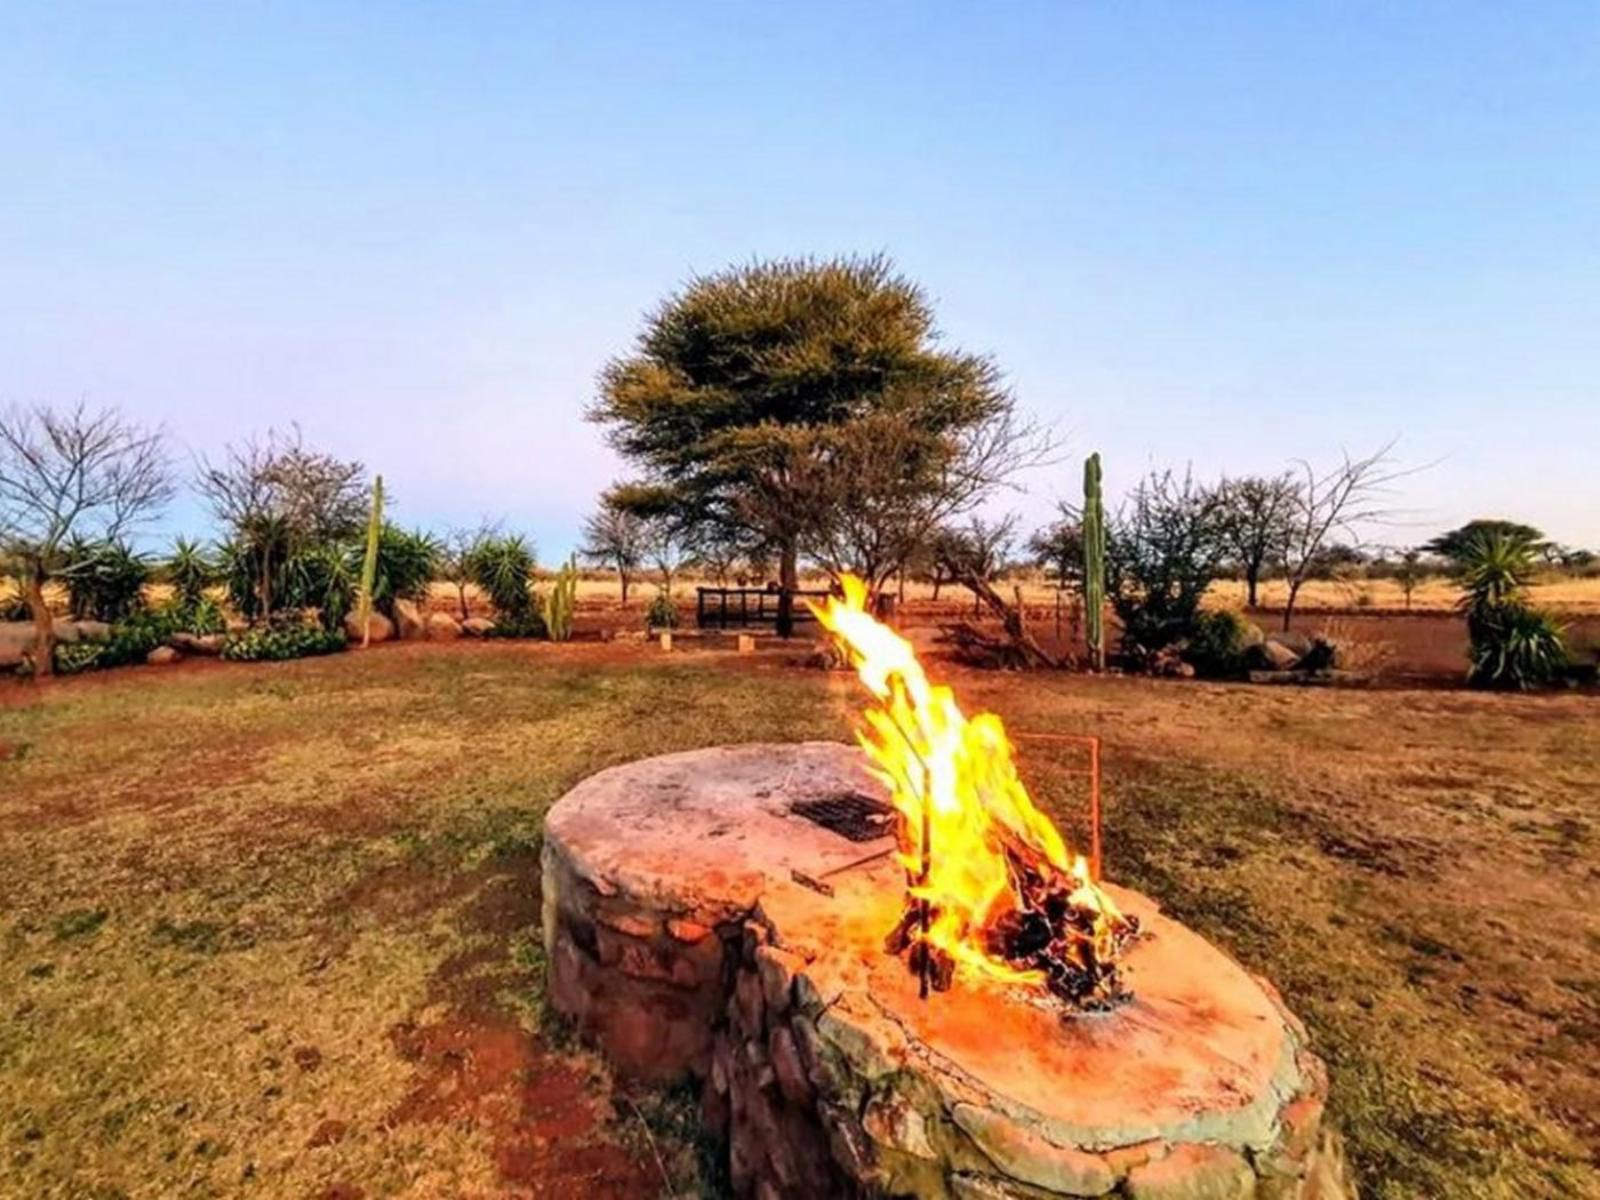 Morakane Safari Lodge Vryburg North West Province South Africa Complementary Colors, Colorful, Fire, Nature